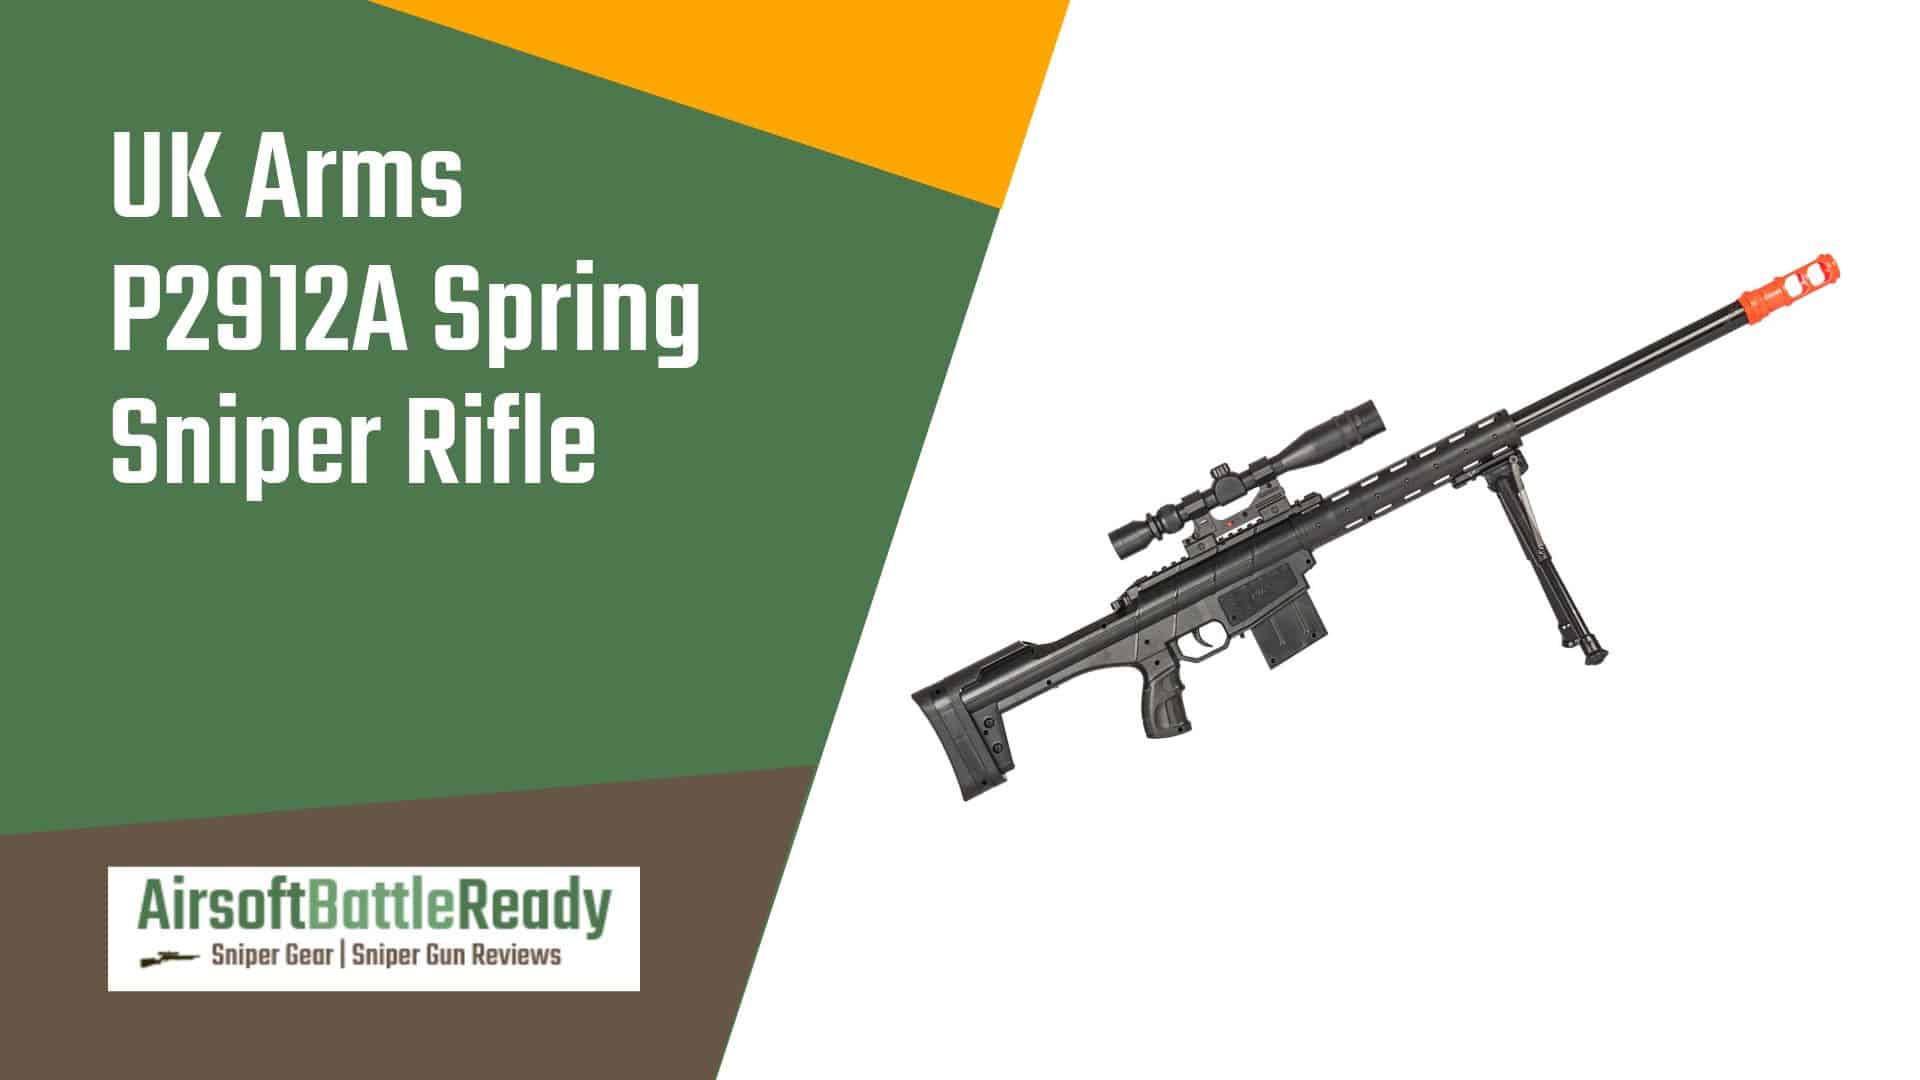 UK Arms P2912A Spring Sniper Rifle Review - Airsoft Battle Ready